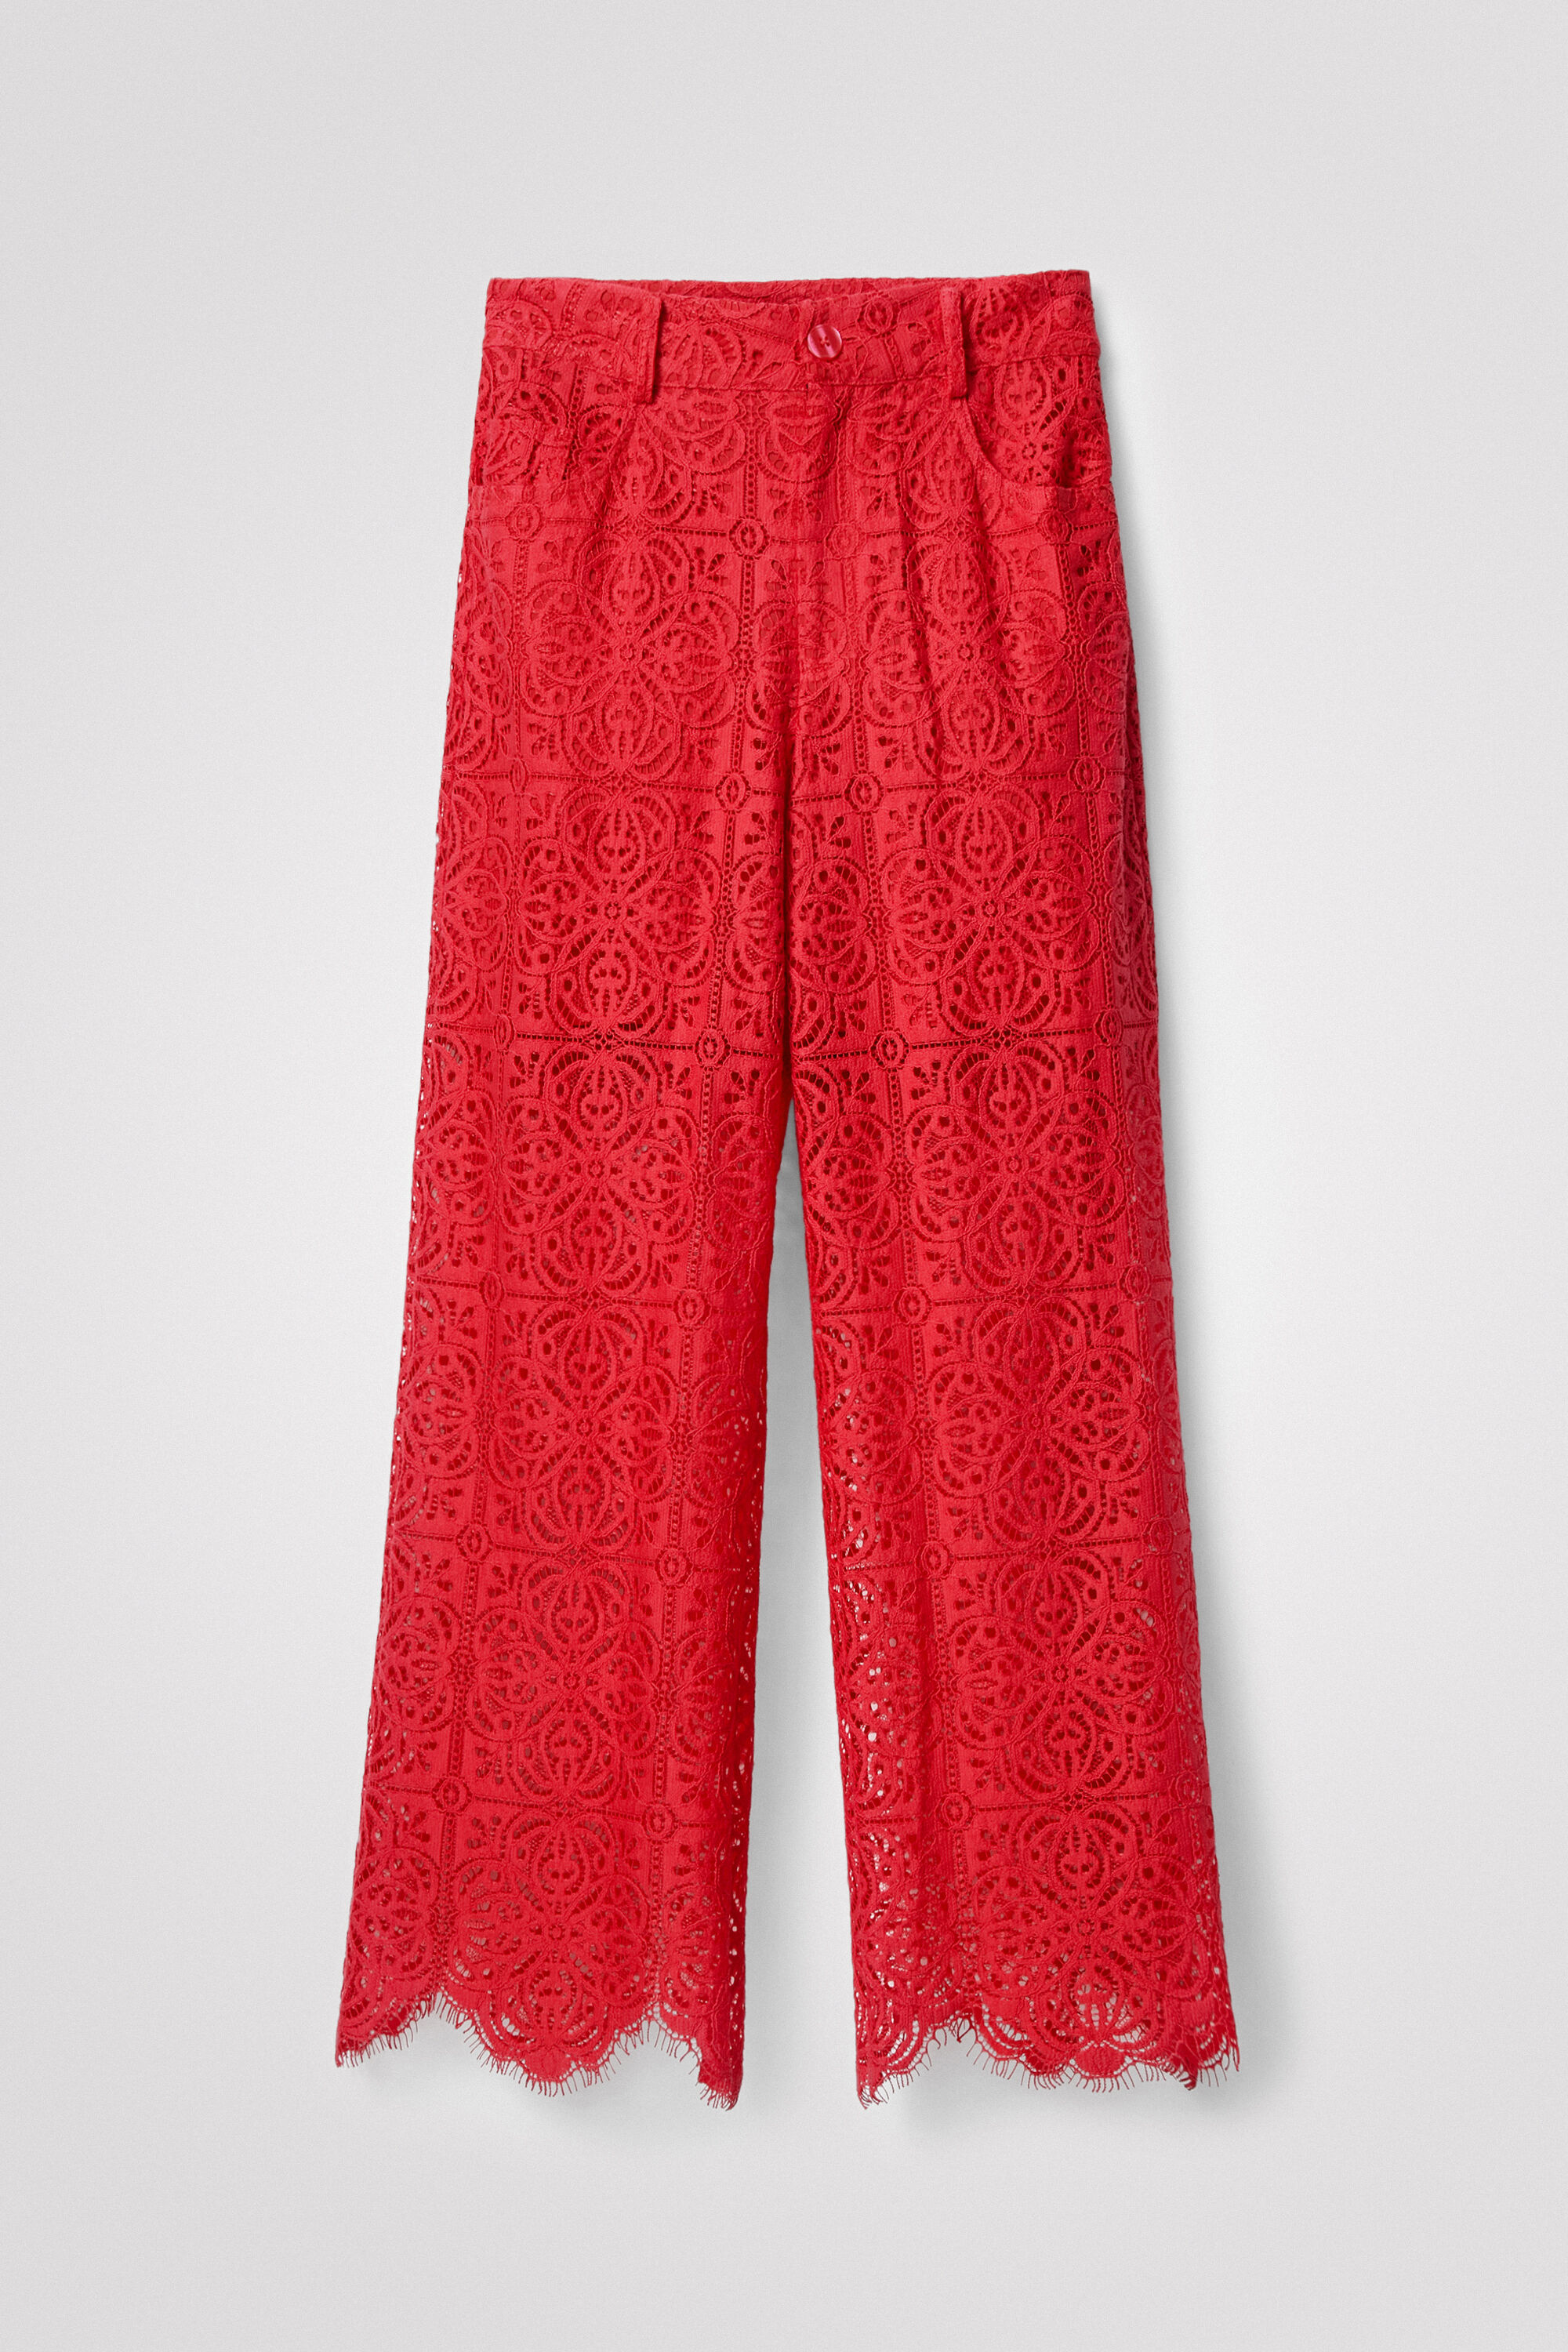 Desigual Sheer Lace Trousers In Red